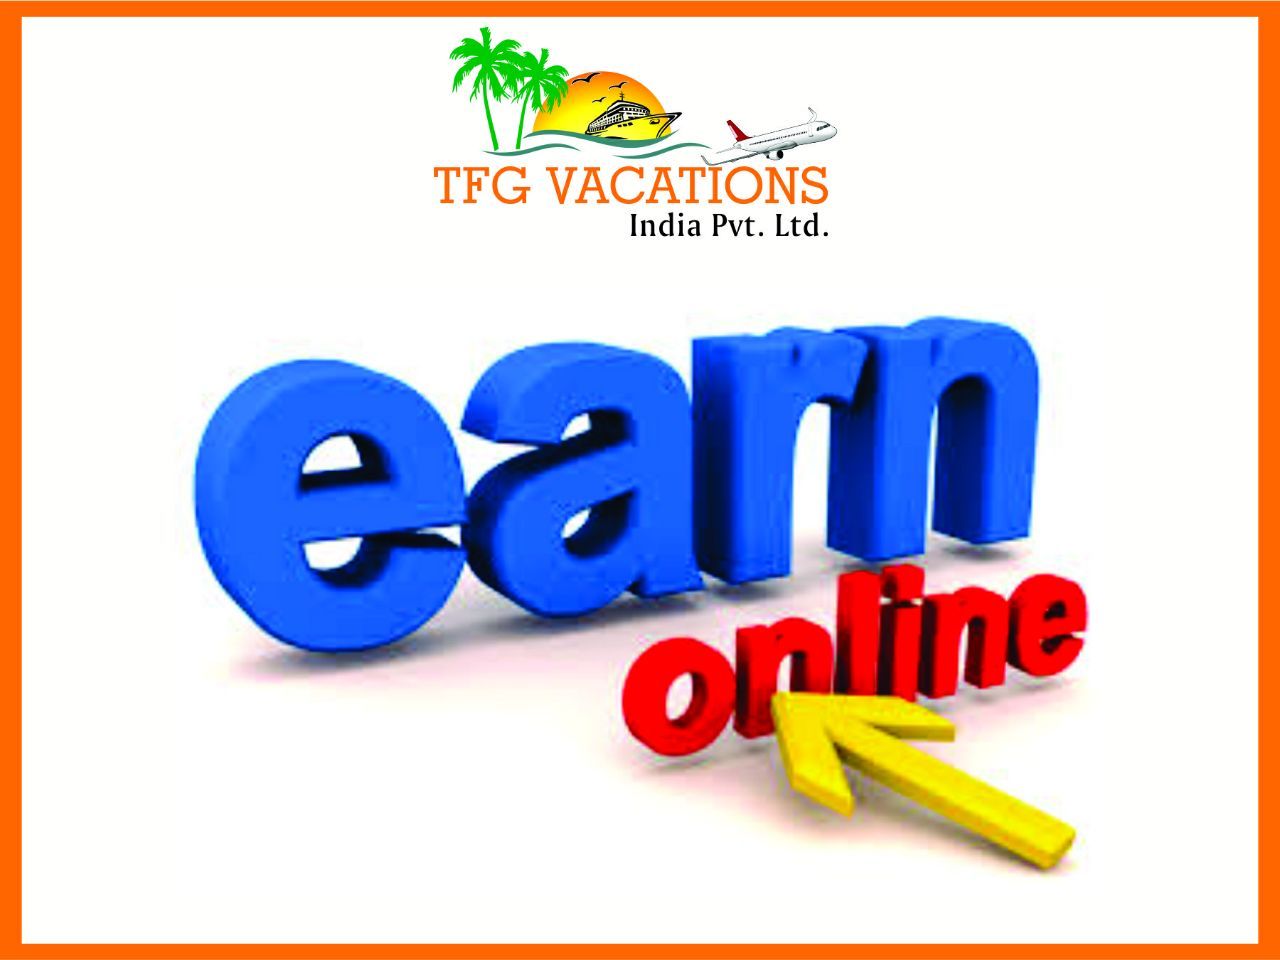 Spend Few Hours Daily And Earn Up to 40,000 Per Month.